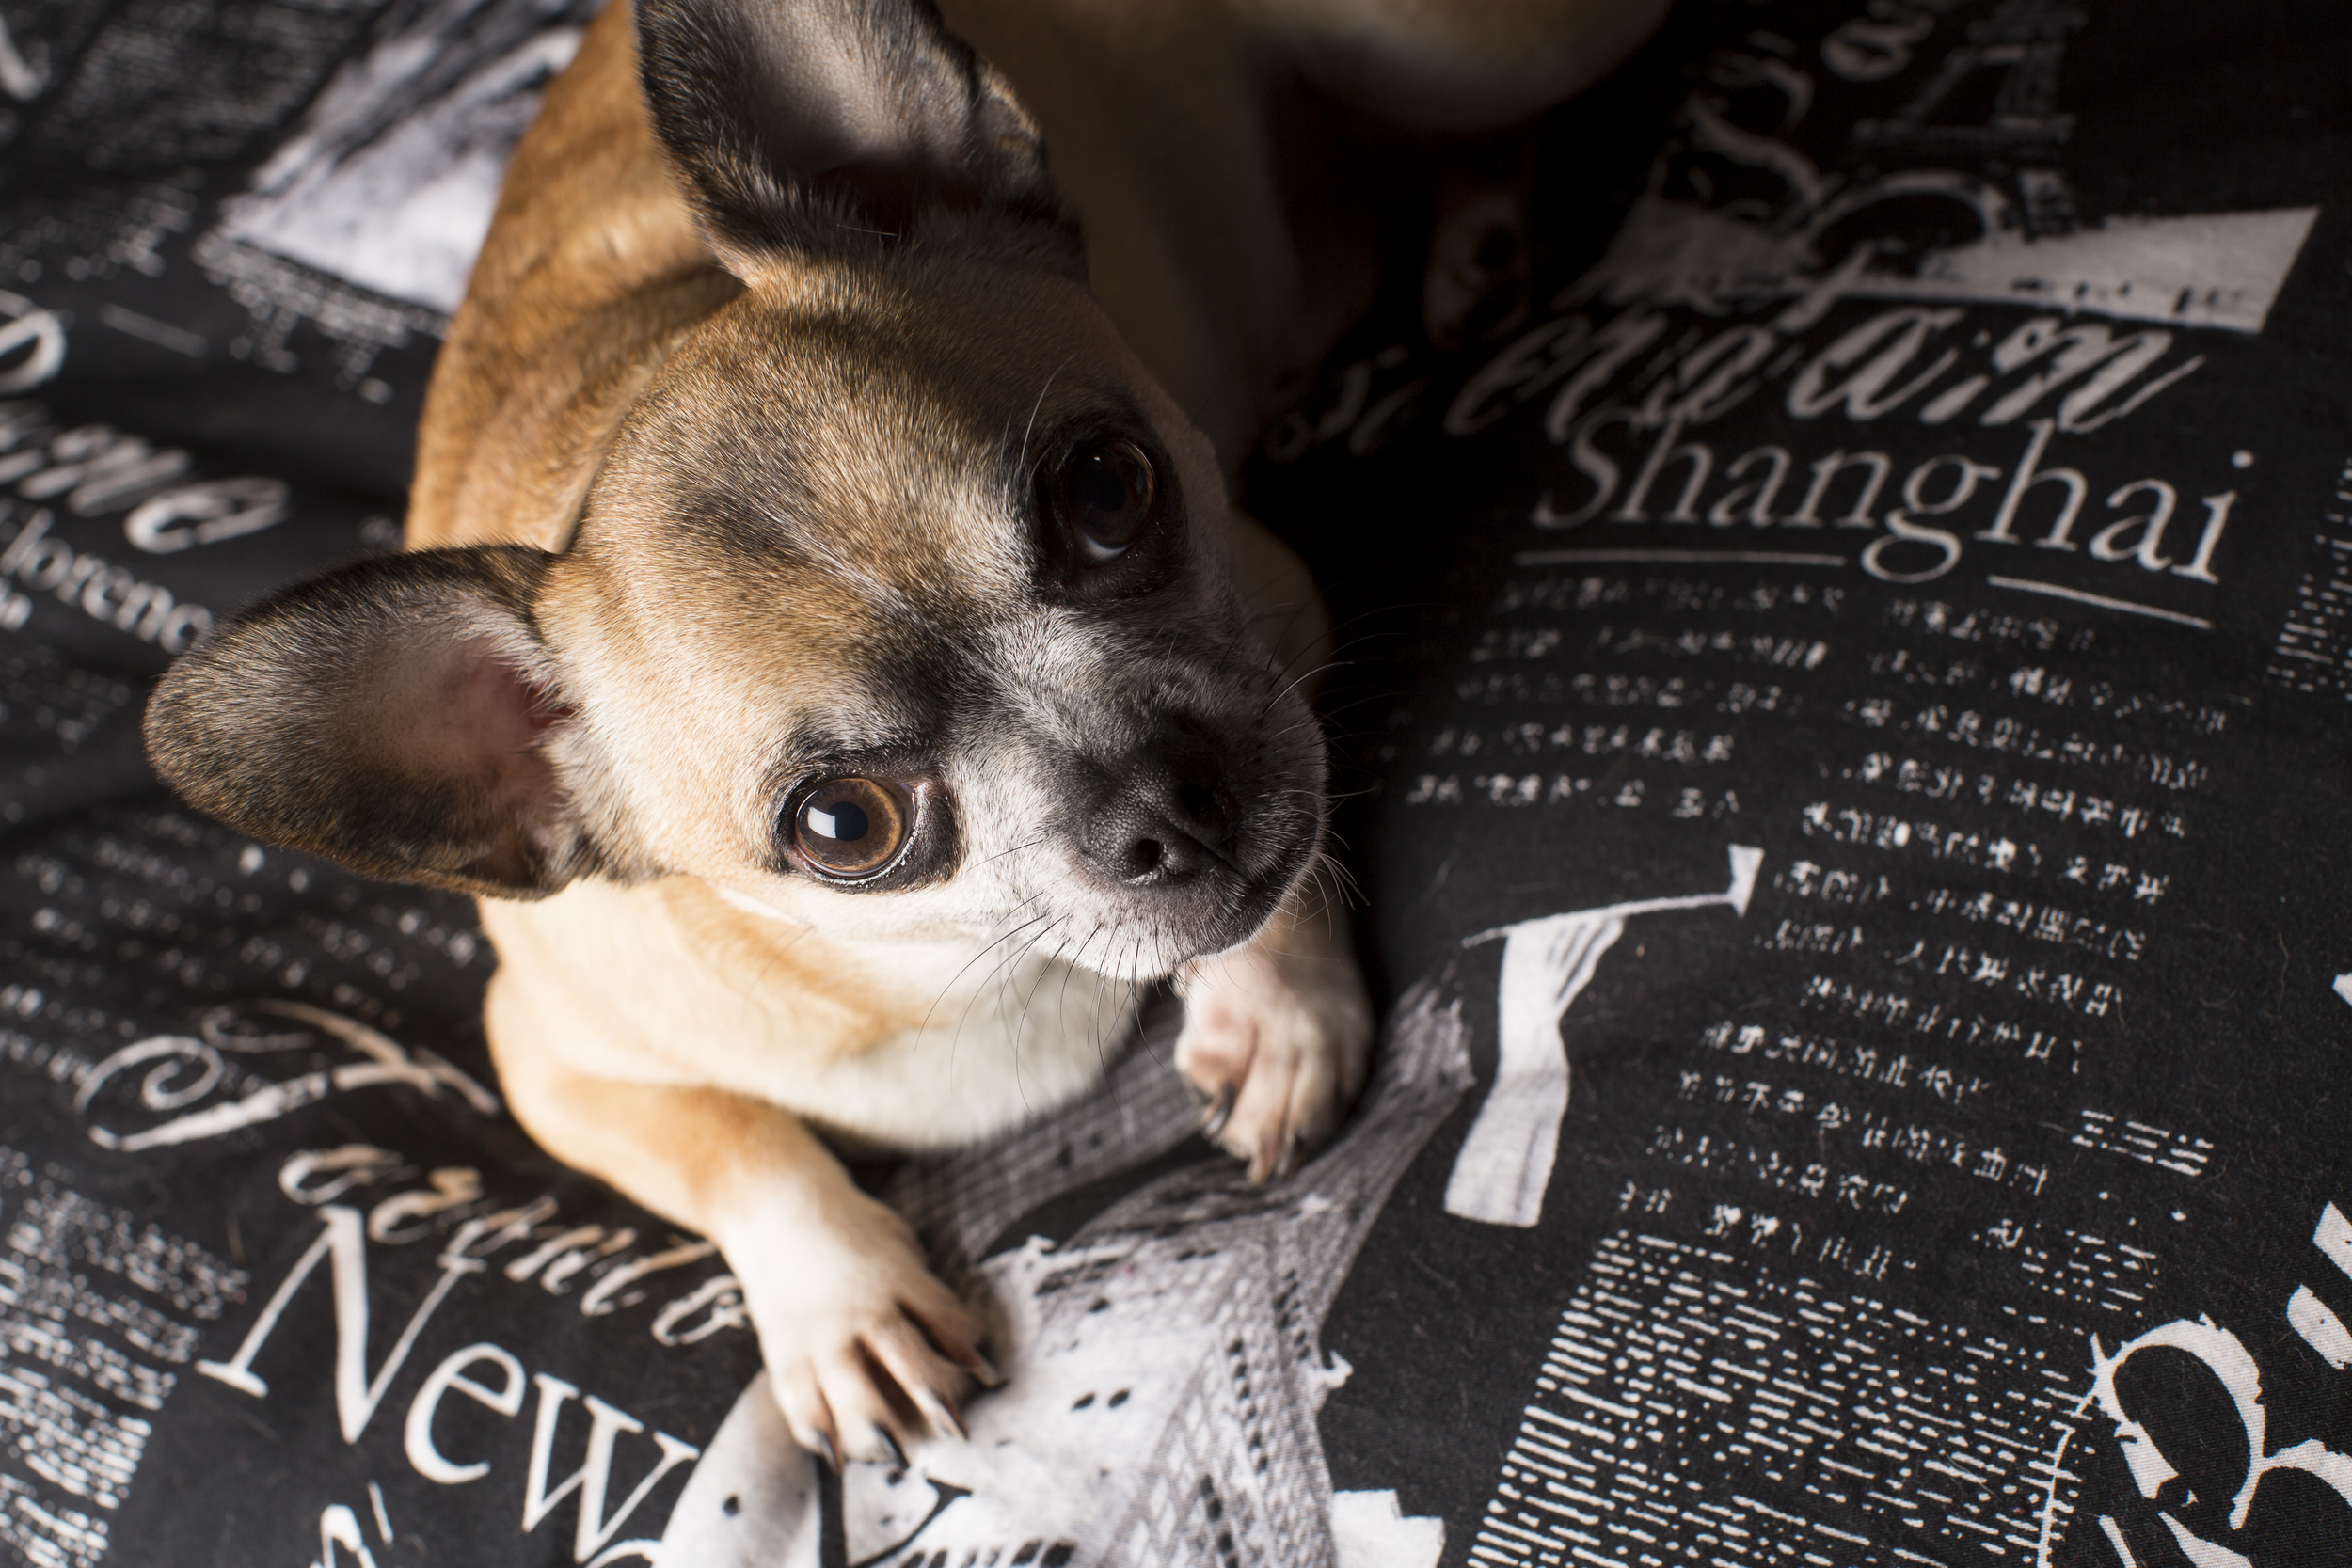 07 Chihuahua dog on location pet photography studio session paris industrial bedding.jpg